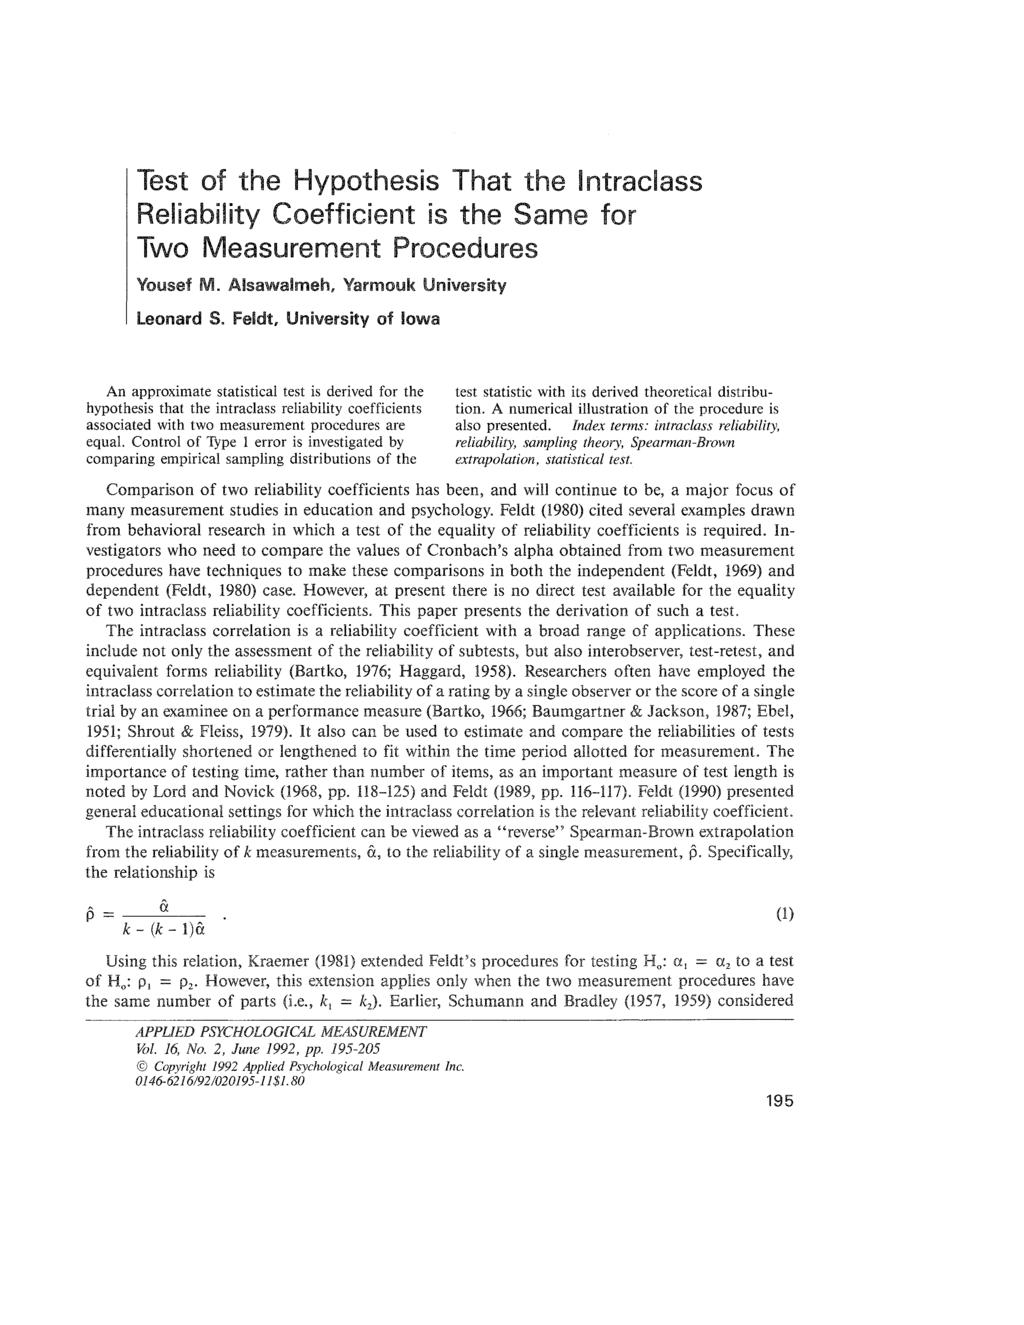 Test of the Hypothesis That the Intraclass Reliability Coefficient is the Same for Two Measurement Procedures Yousef M. Alsawalmeh, Yarmouk University Leonard S.